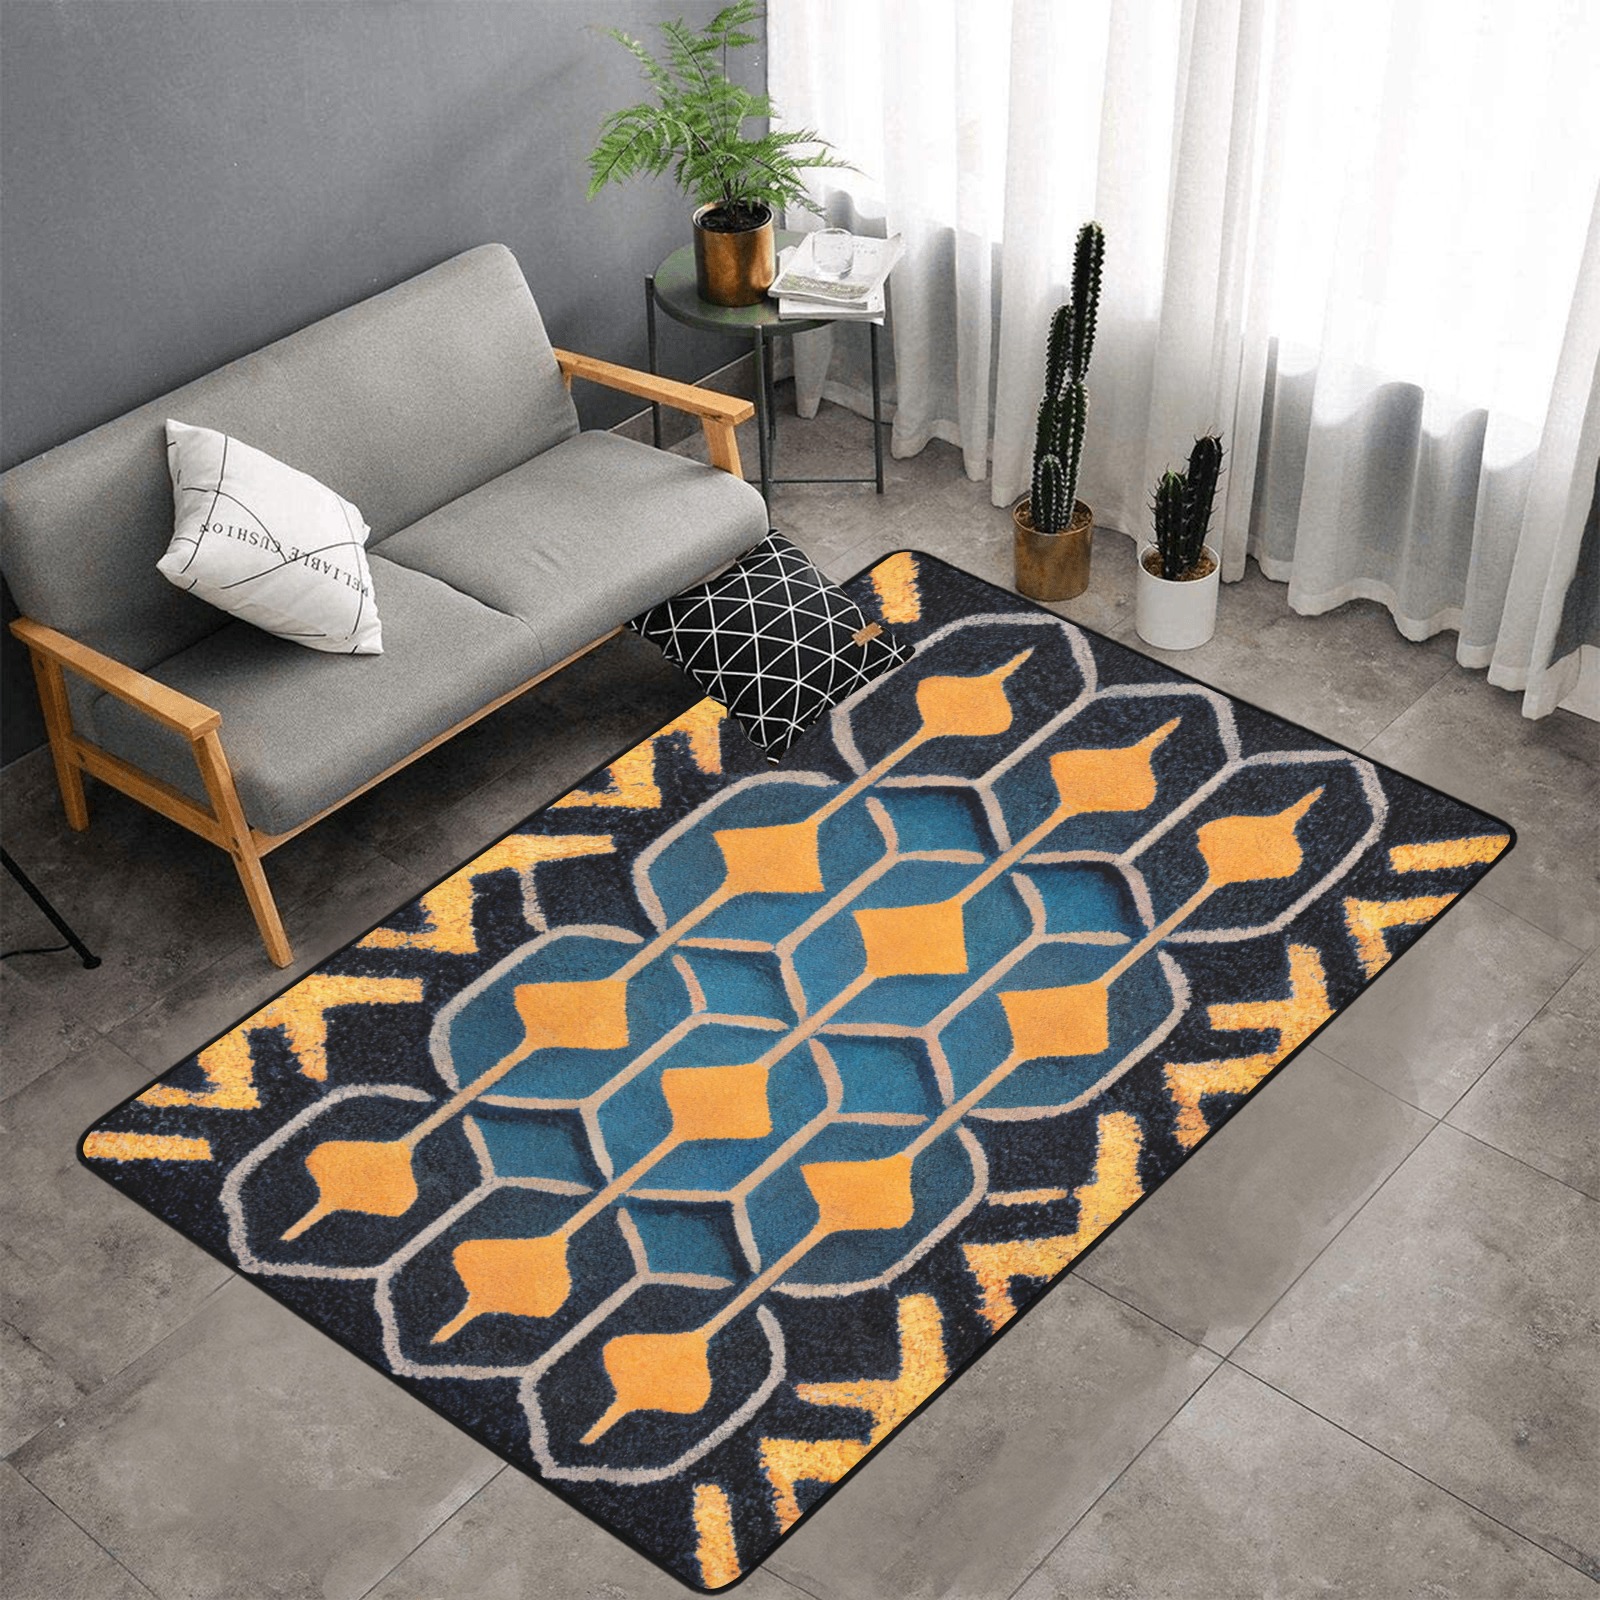 repeating pattern, gold and blue Area Rug with Black Binding 7'x5'